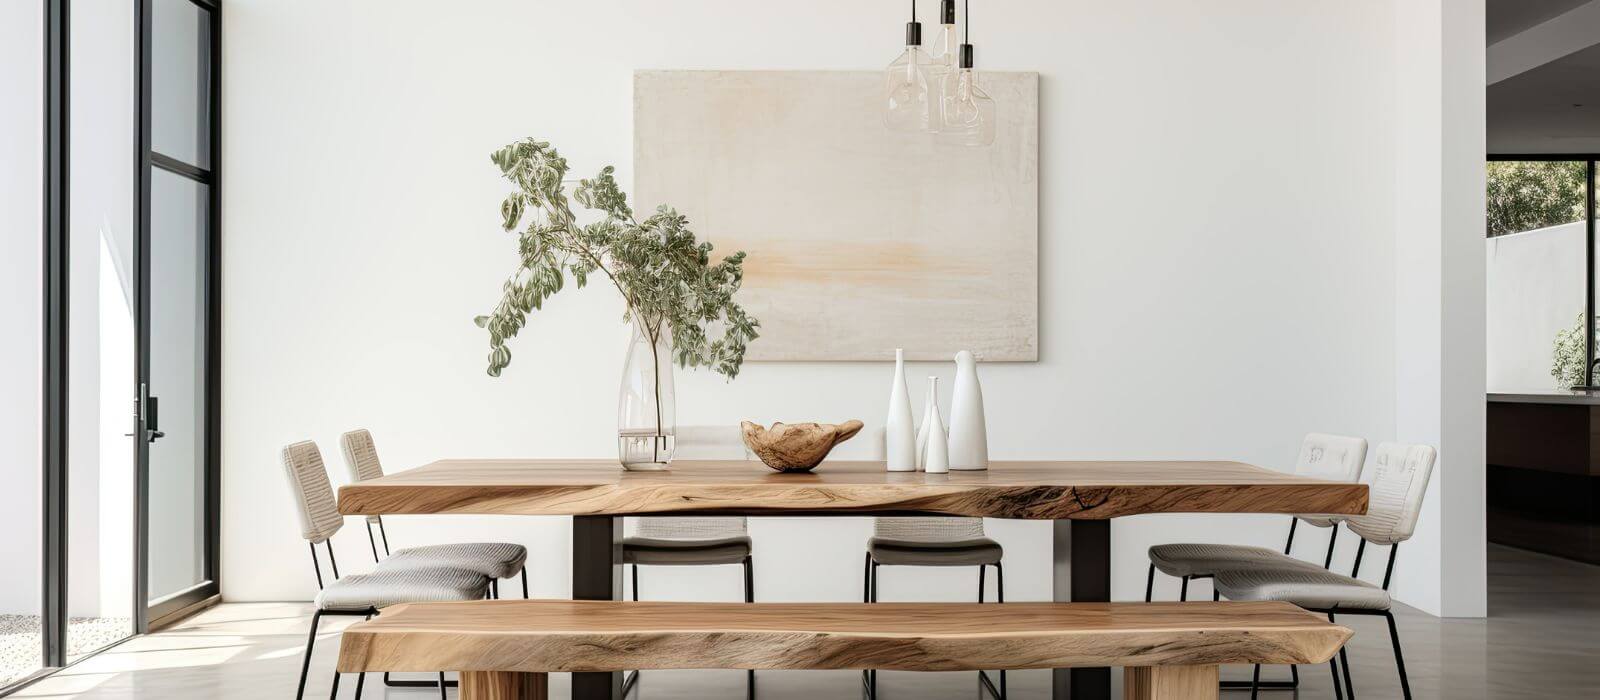 How to style your dining table when not being used for dinner Beautiful Home Decor Home Decorating tips and ideas